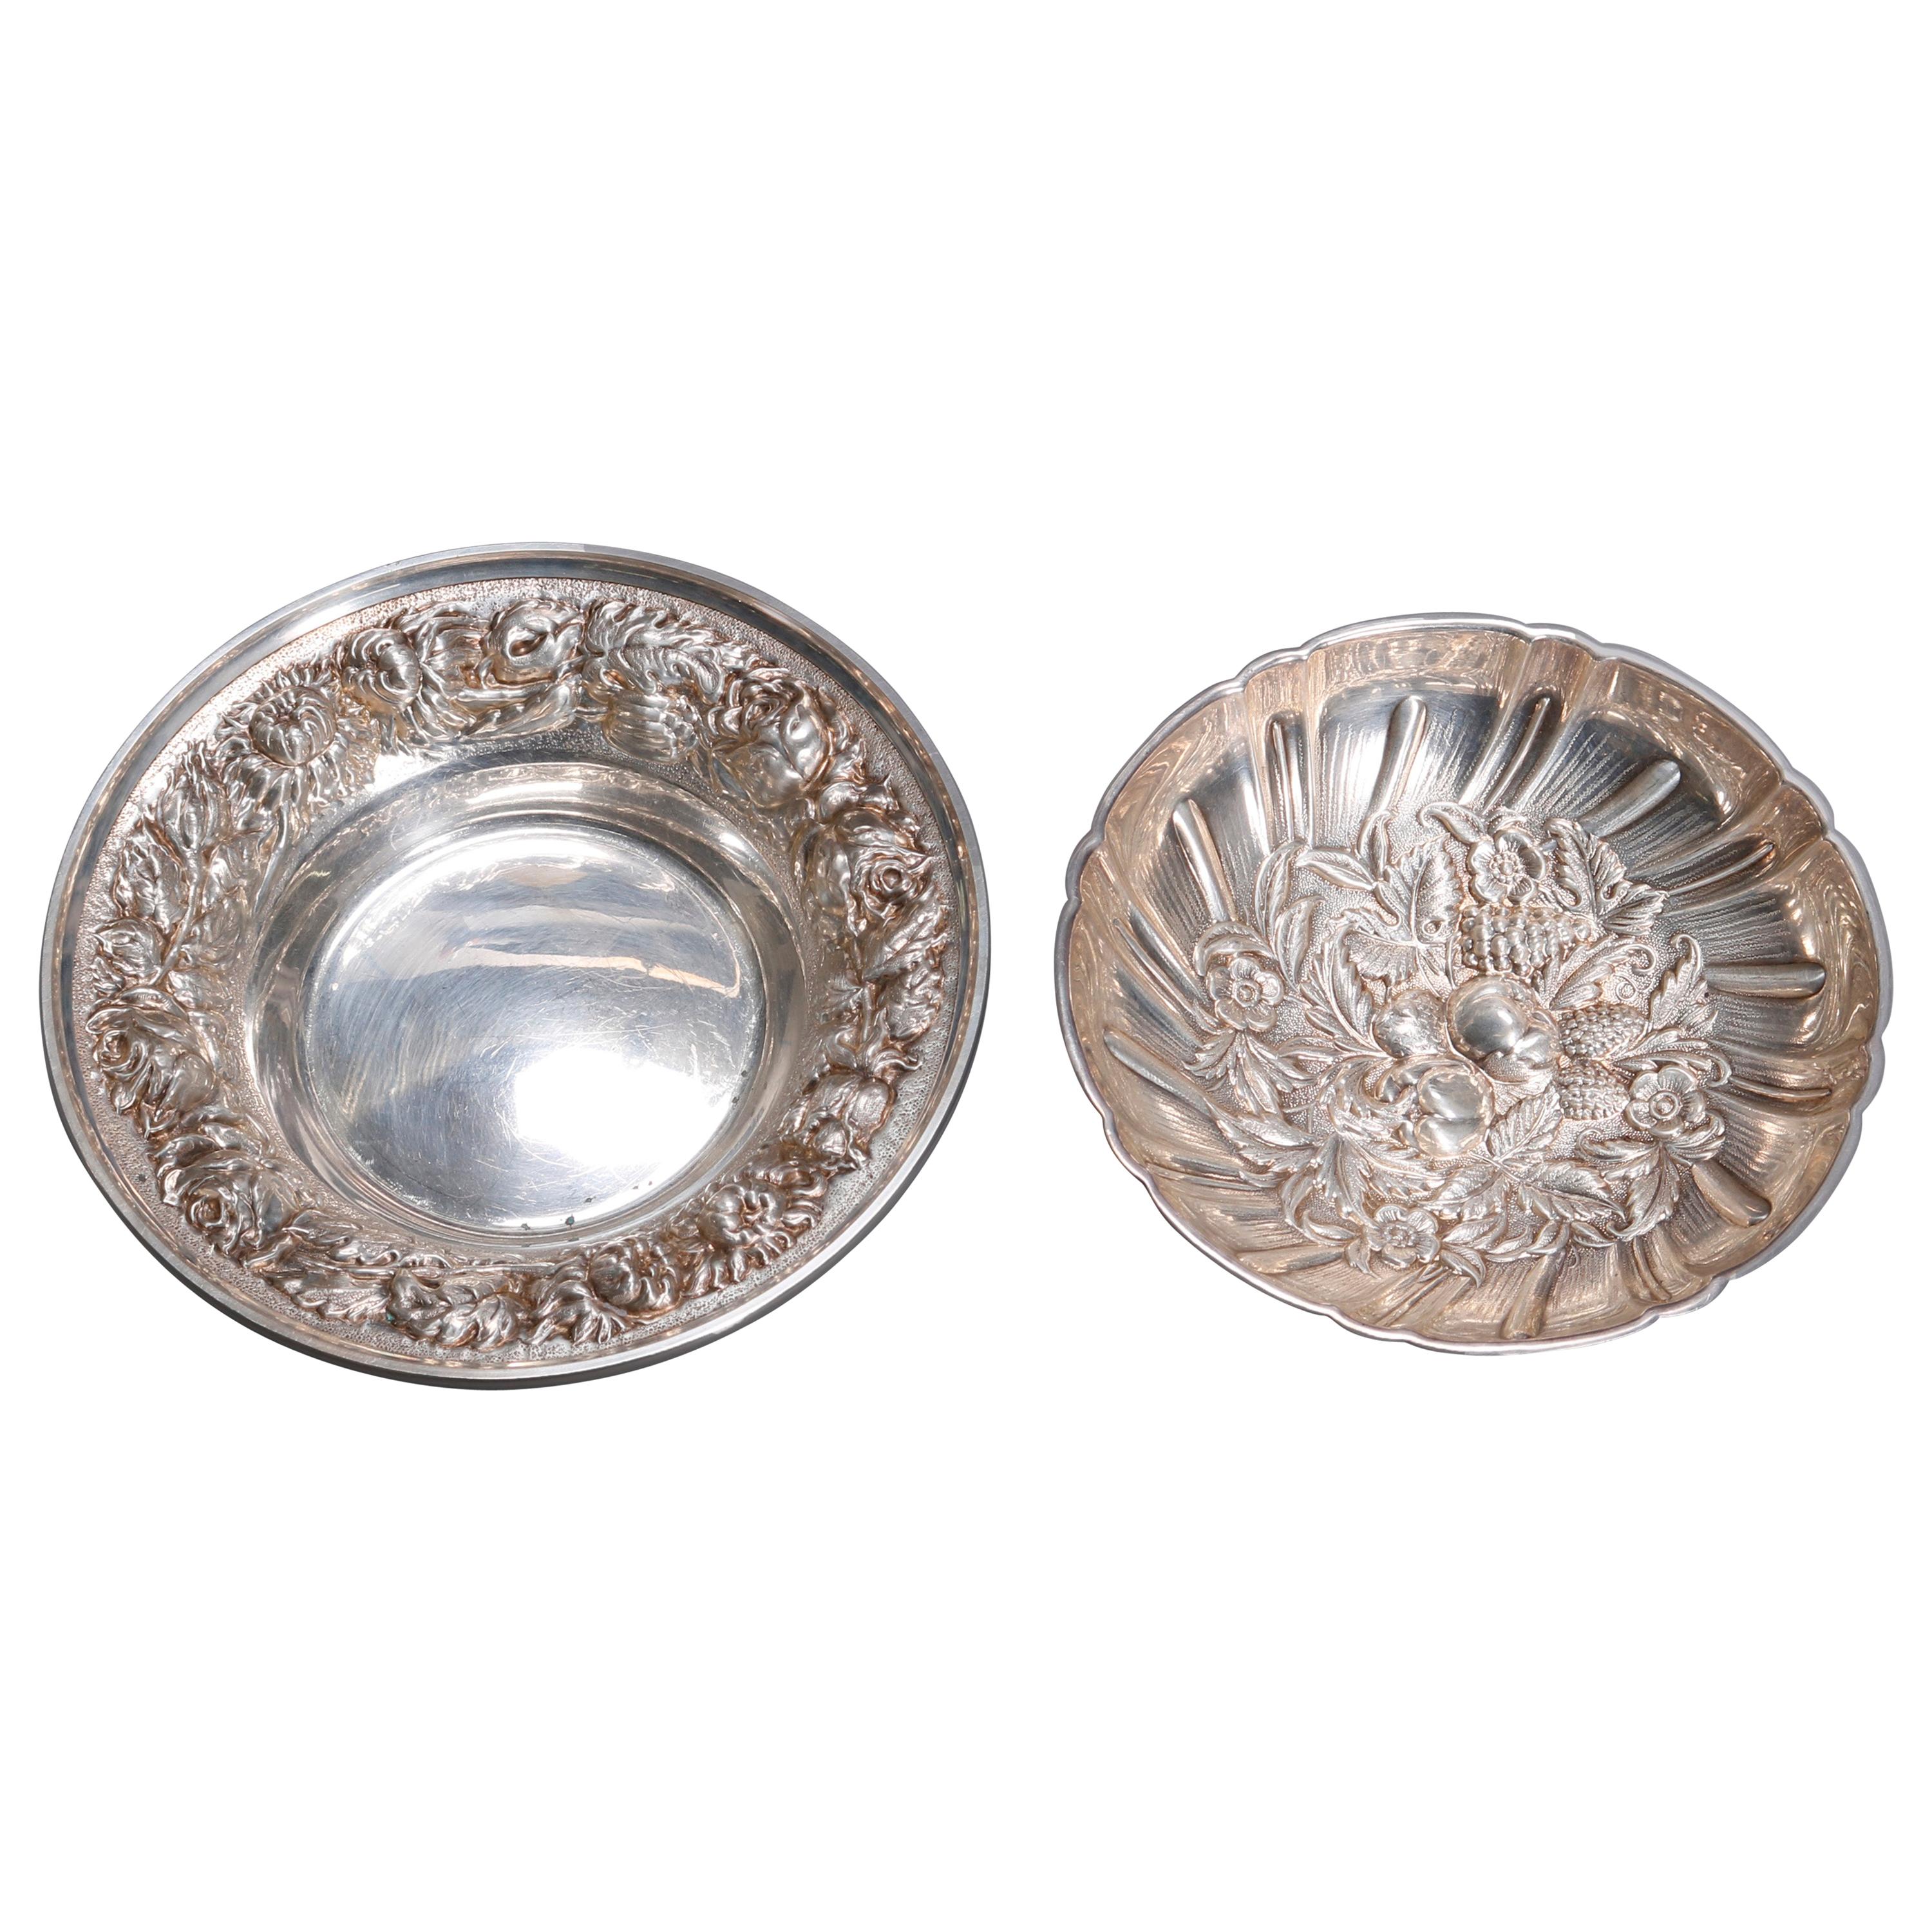 Pair of Sterling Silver Kirk & Stieff Repousse Nut Bowls, circa 1900 6.7 toz